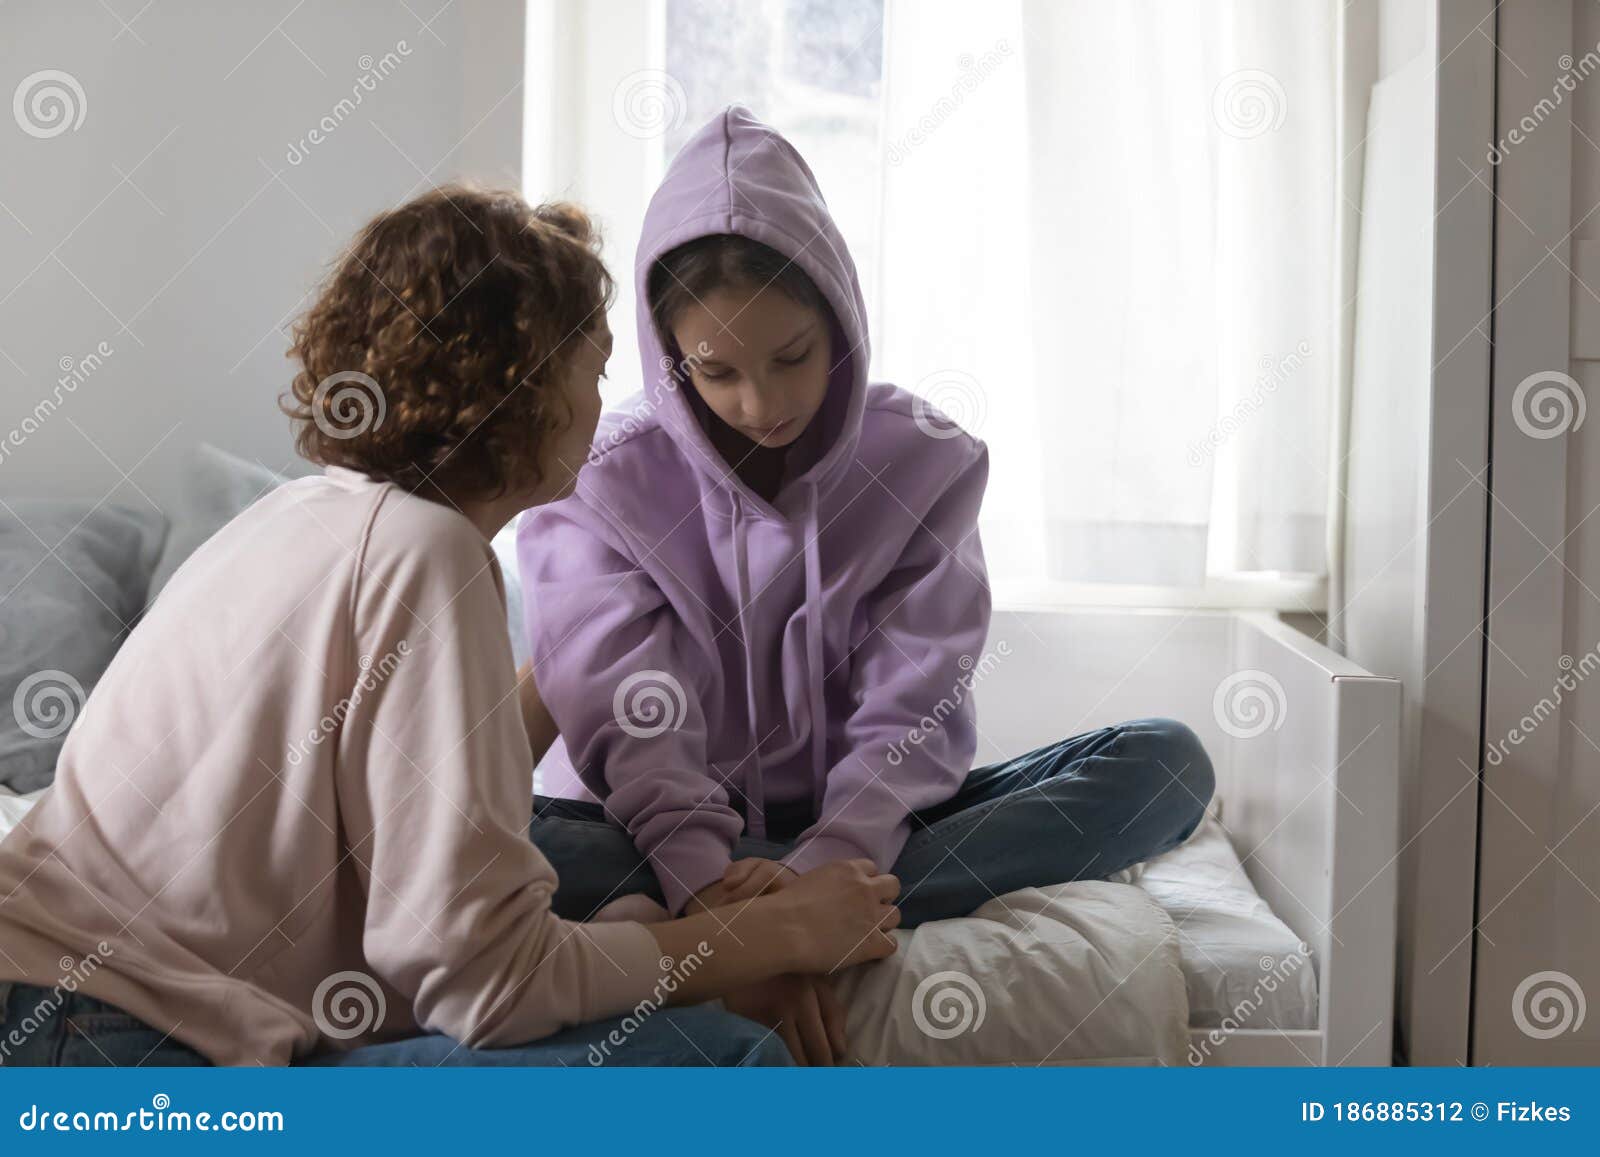 caring mom talk with sad teenage daughter suffering at home